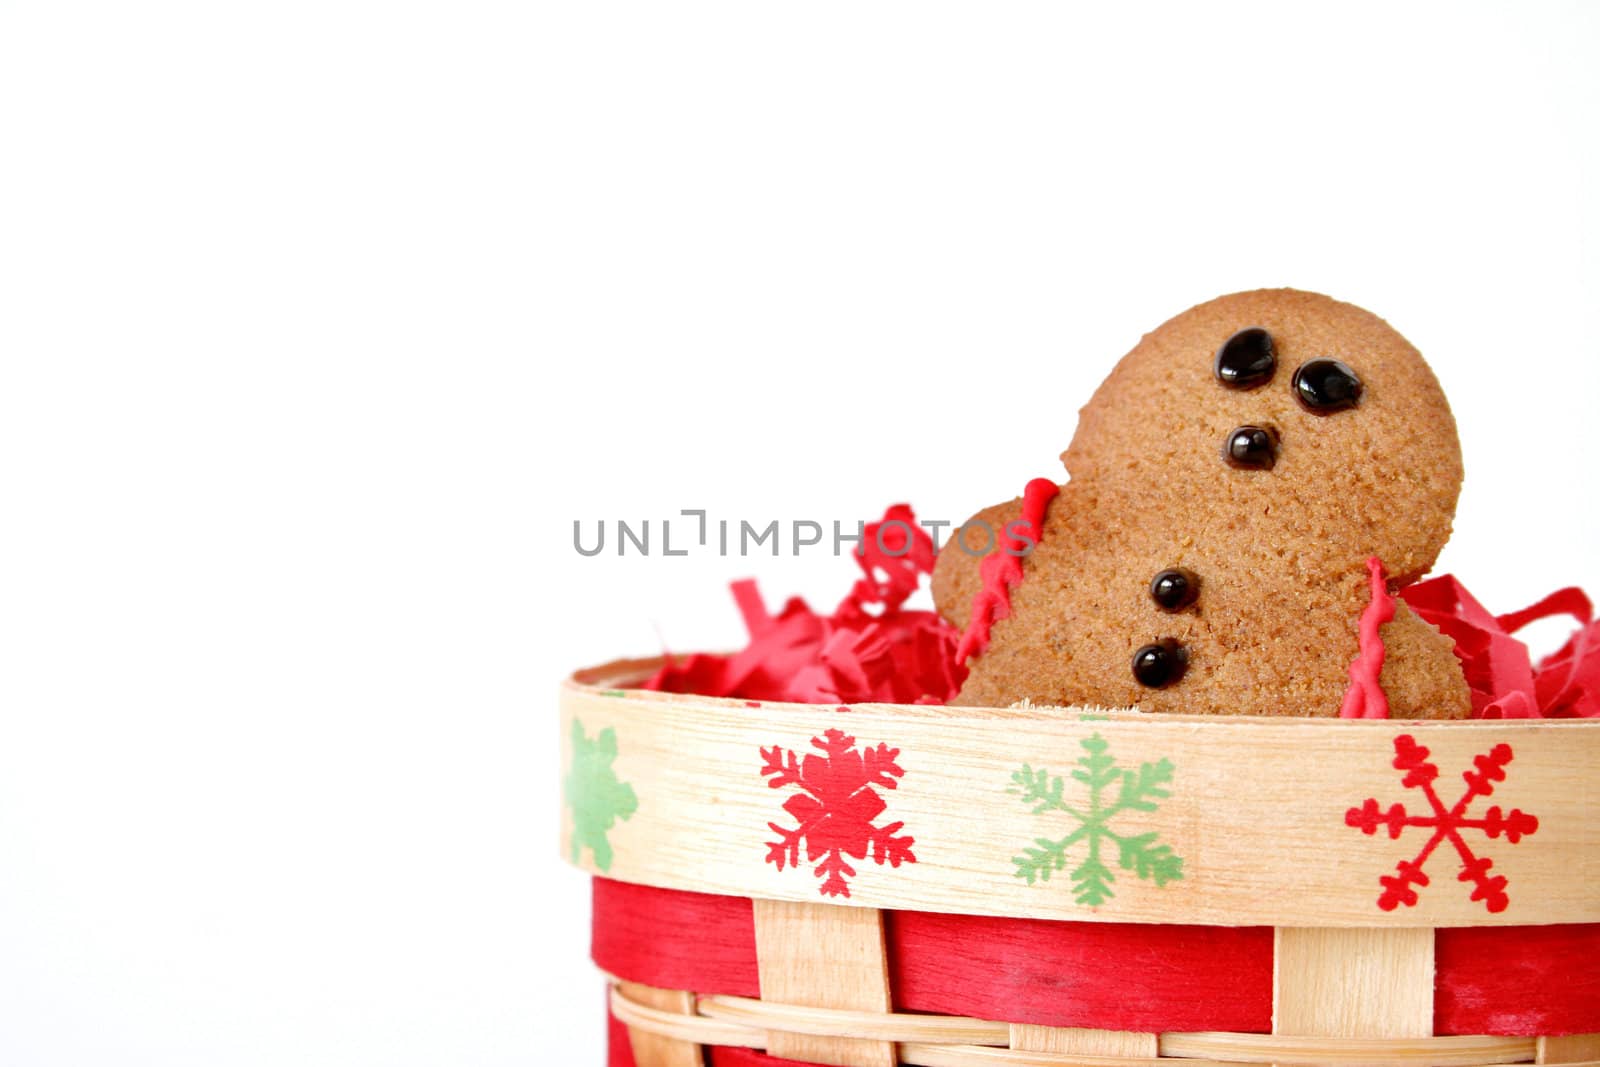 Isolated gingerbread man in a Christmas themed basket.